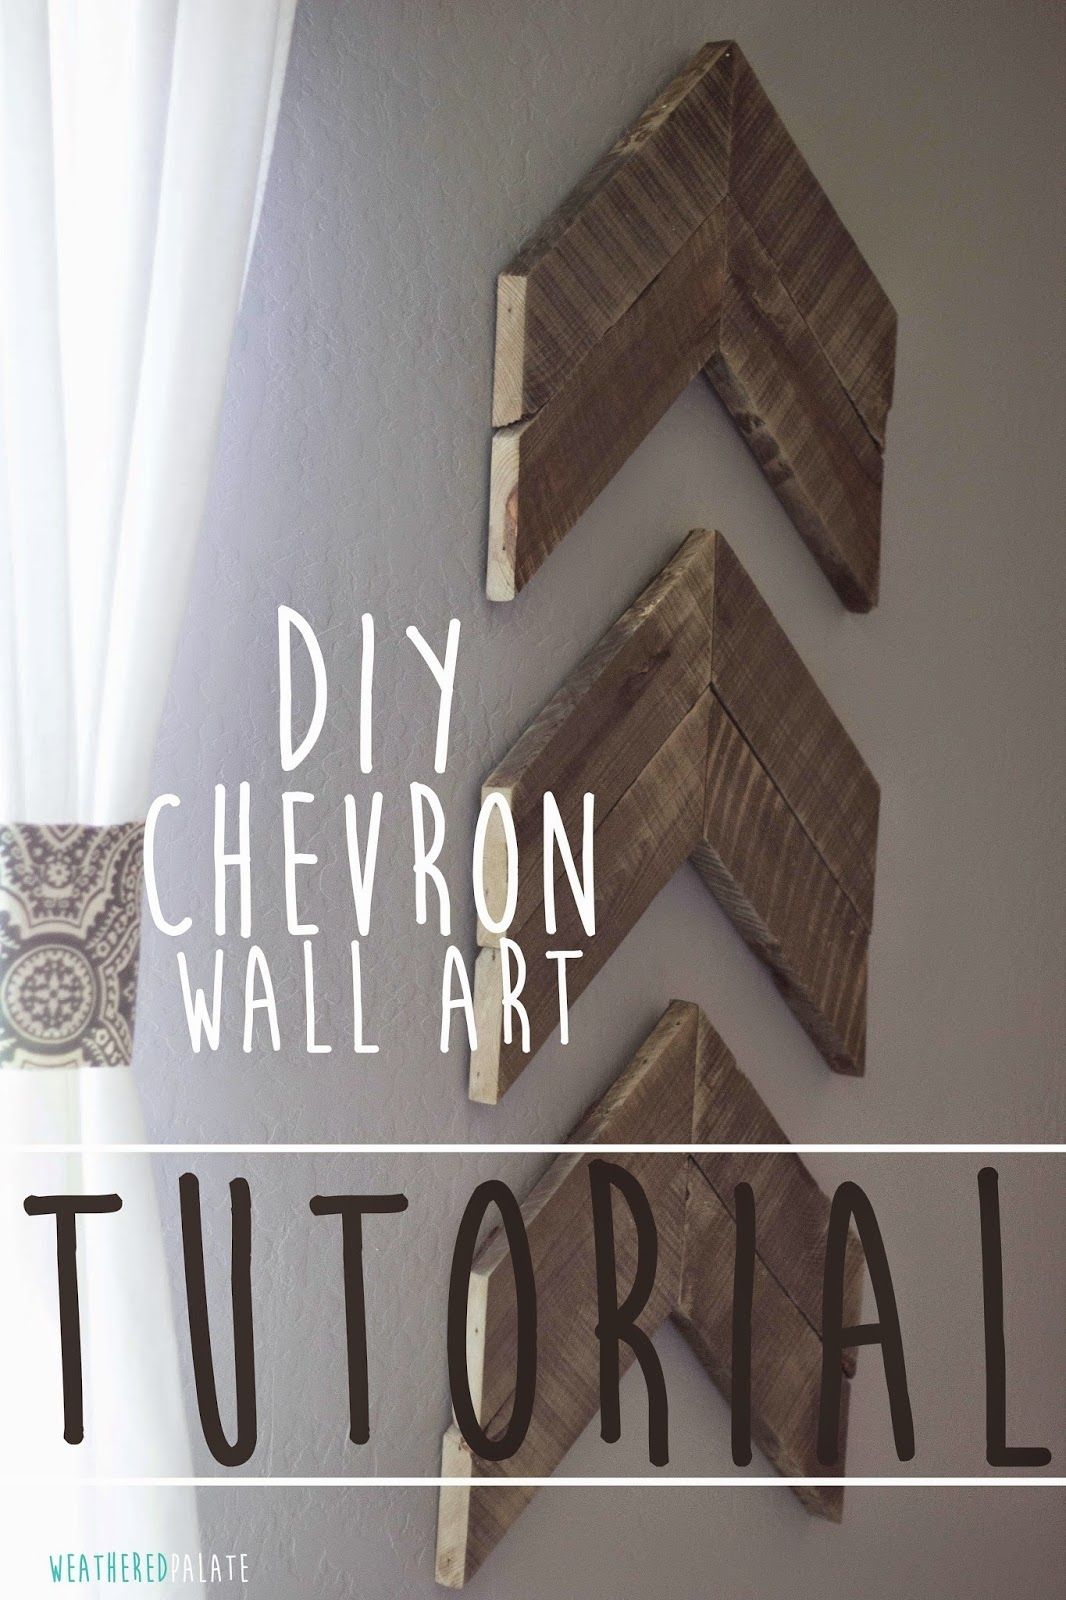 Diy Chevron Wall Art {tutorial} | The Weathered Palate For Diy Wood Wall Art (View 14 of 20)